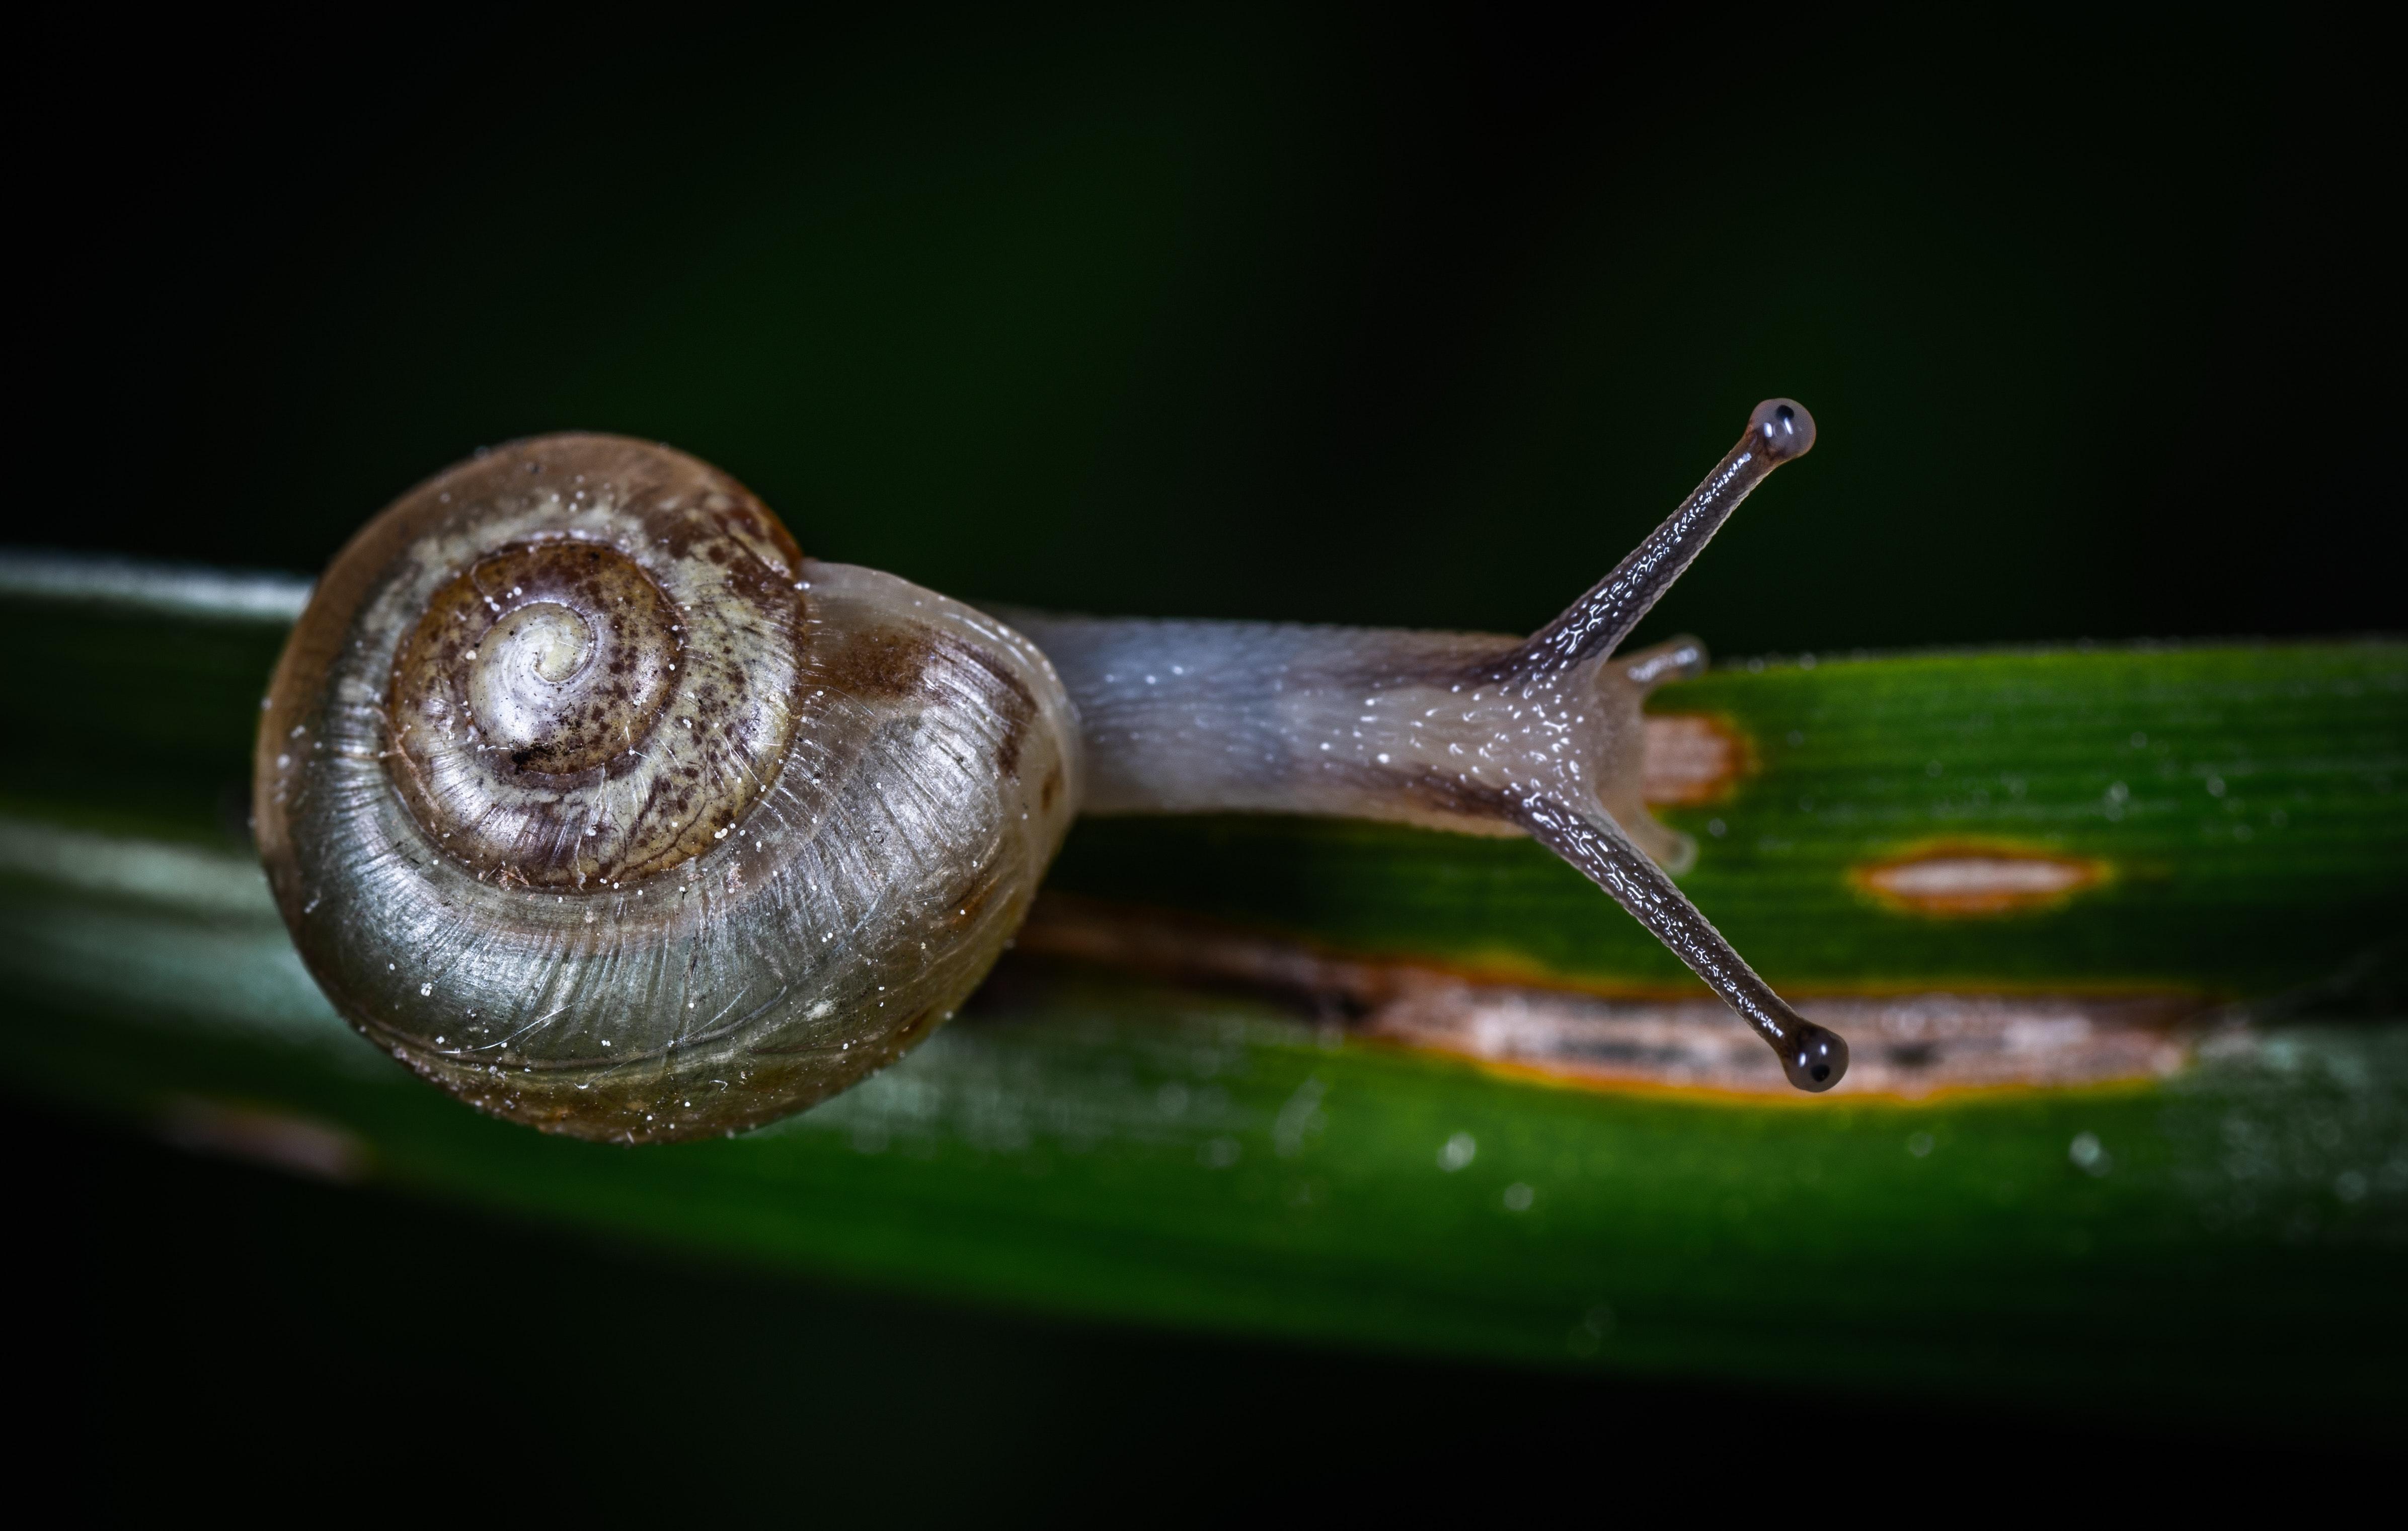 How many legs do snails have? 